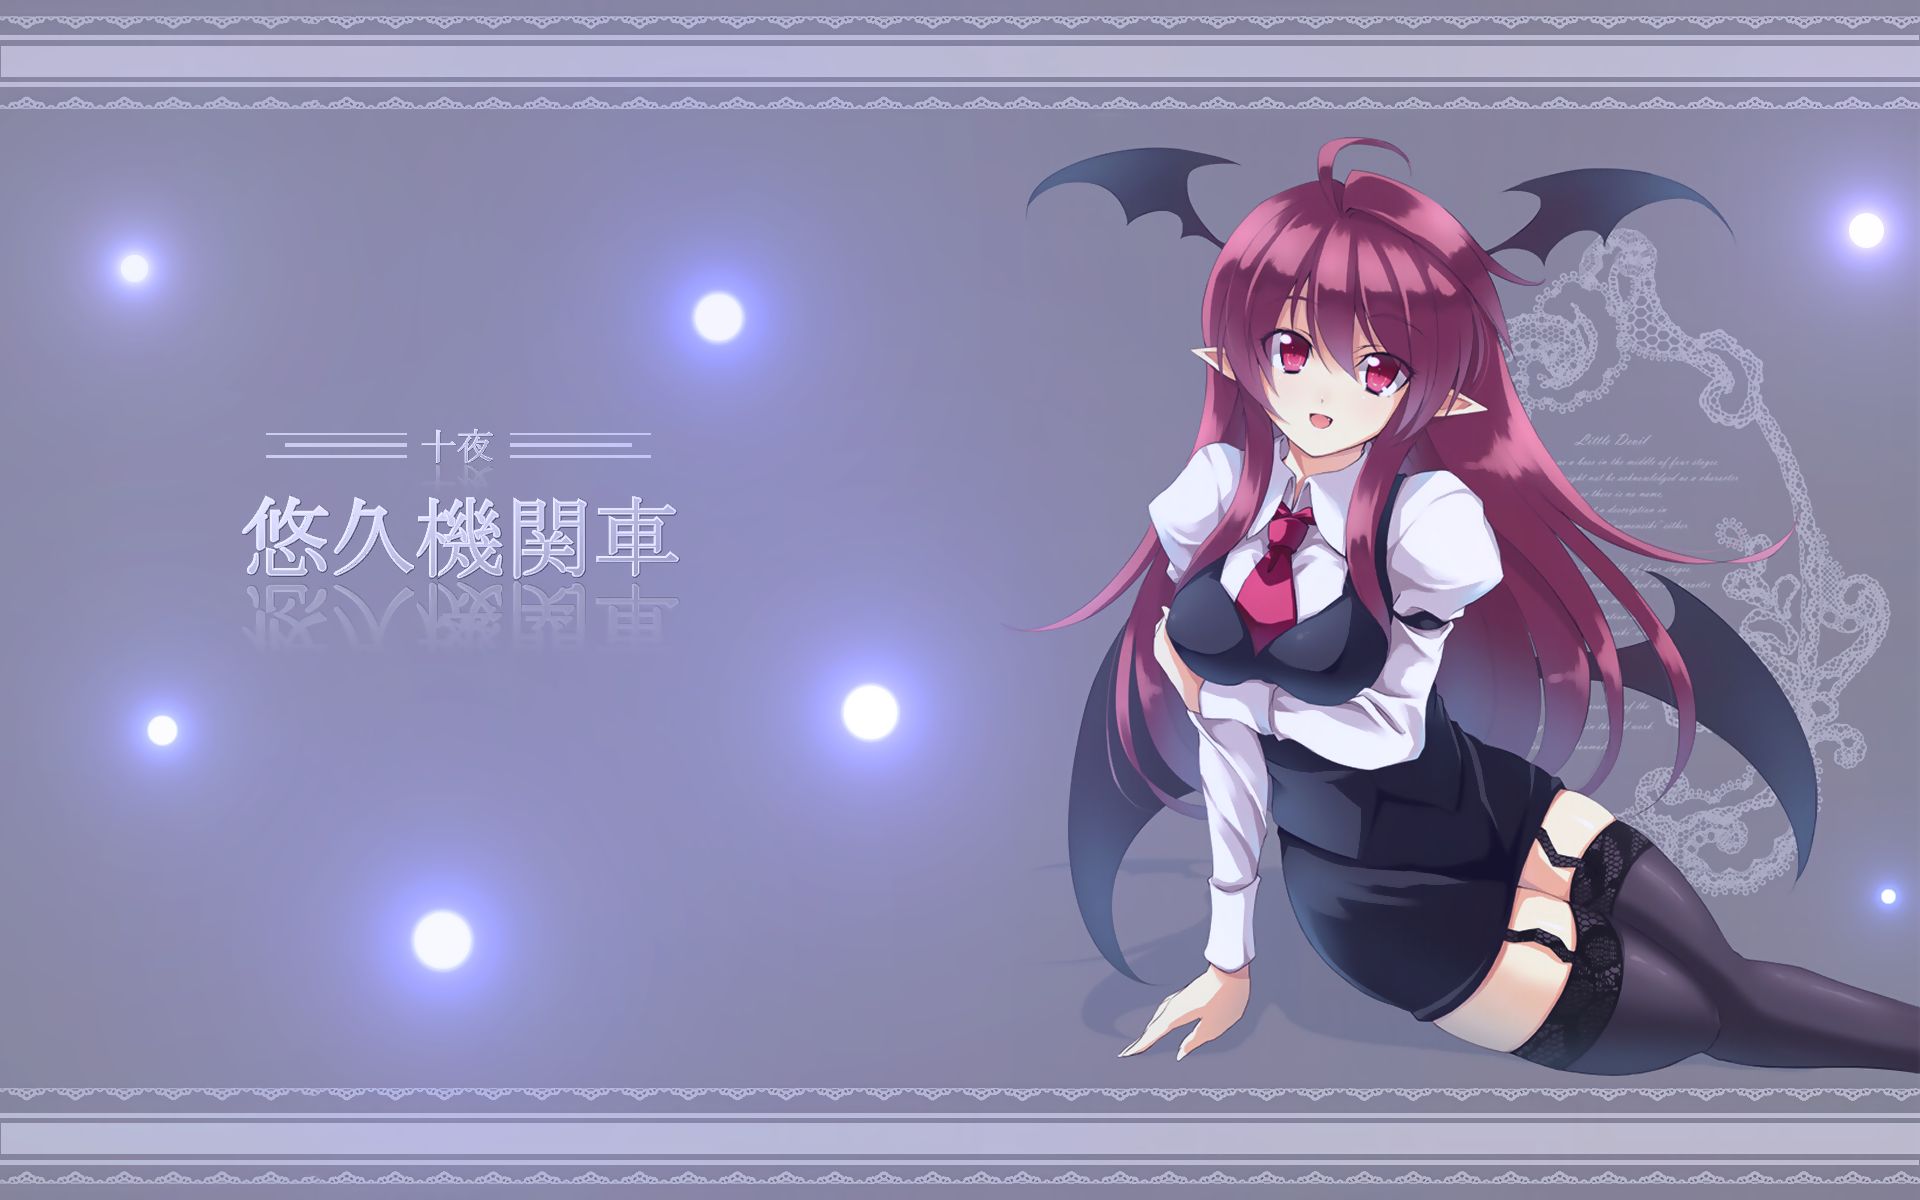 Download Anime Succubus With Glowing Eyes Wallpaper | Wallpapers.com